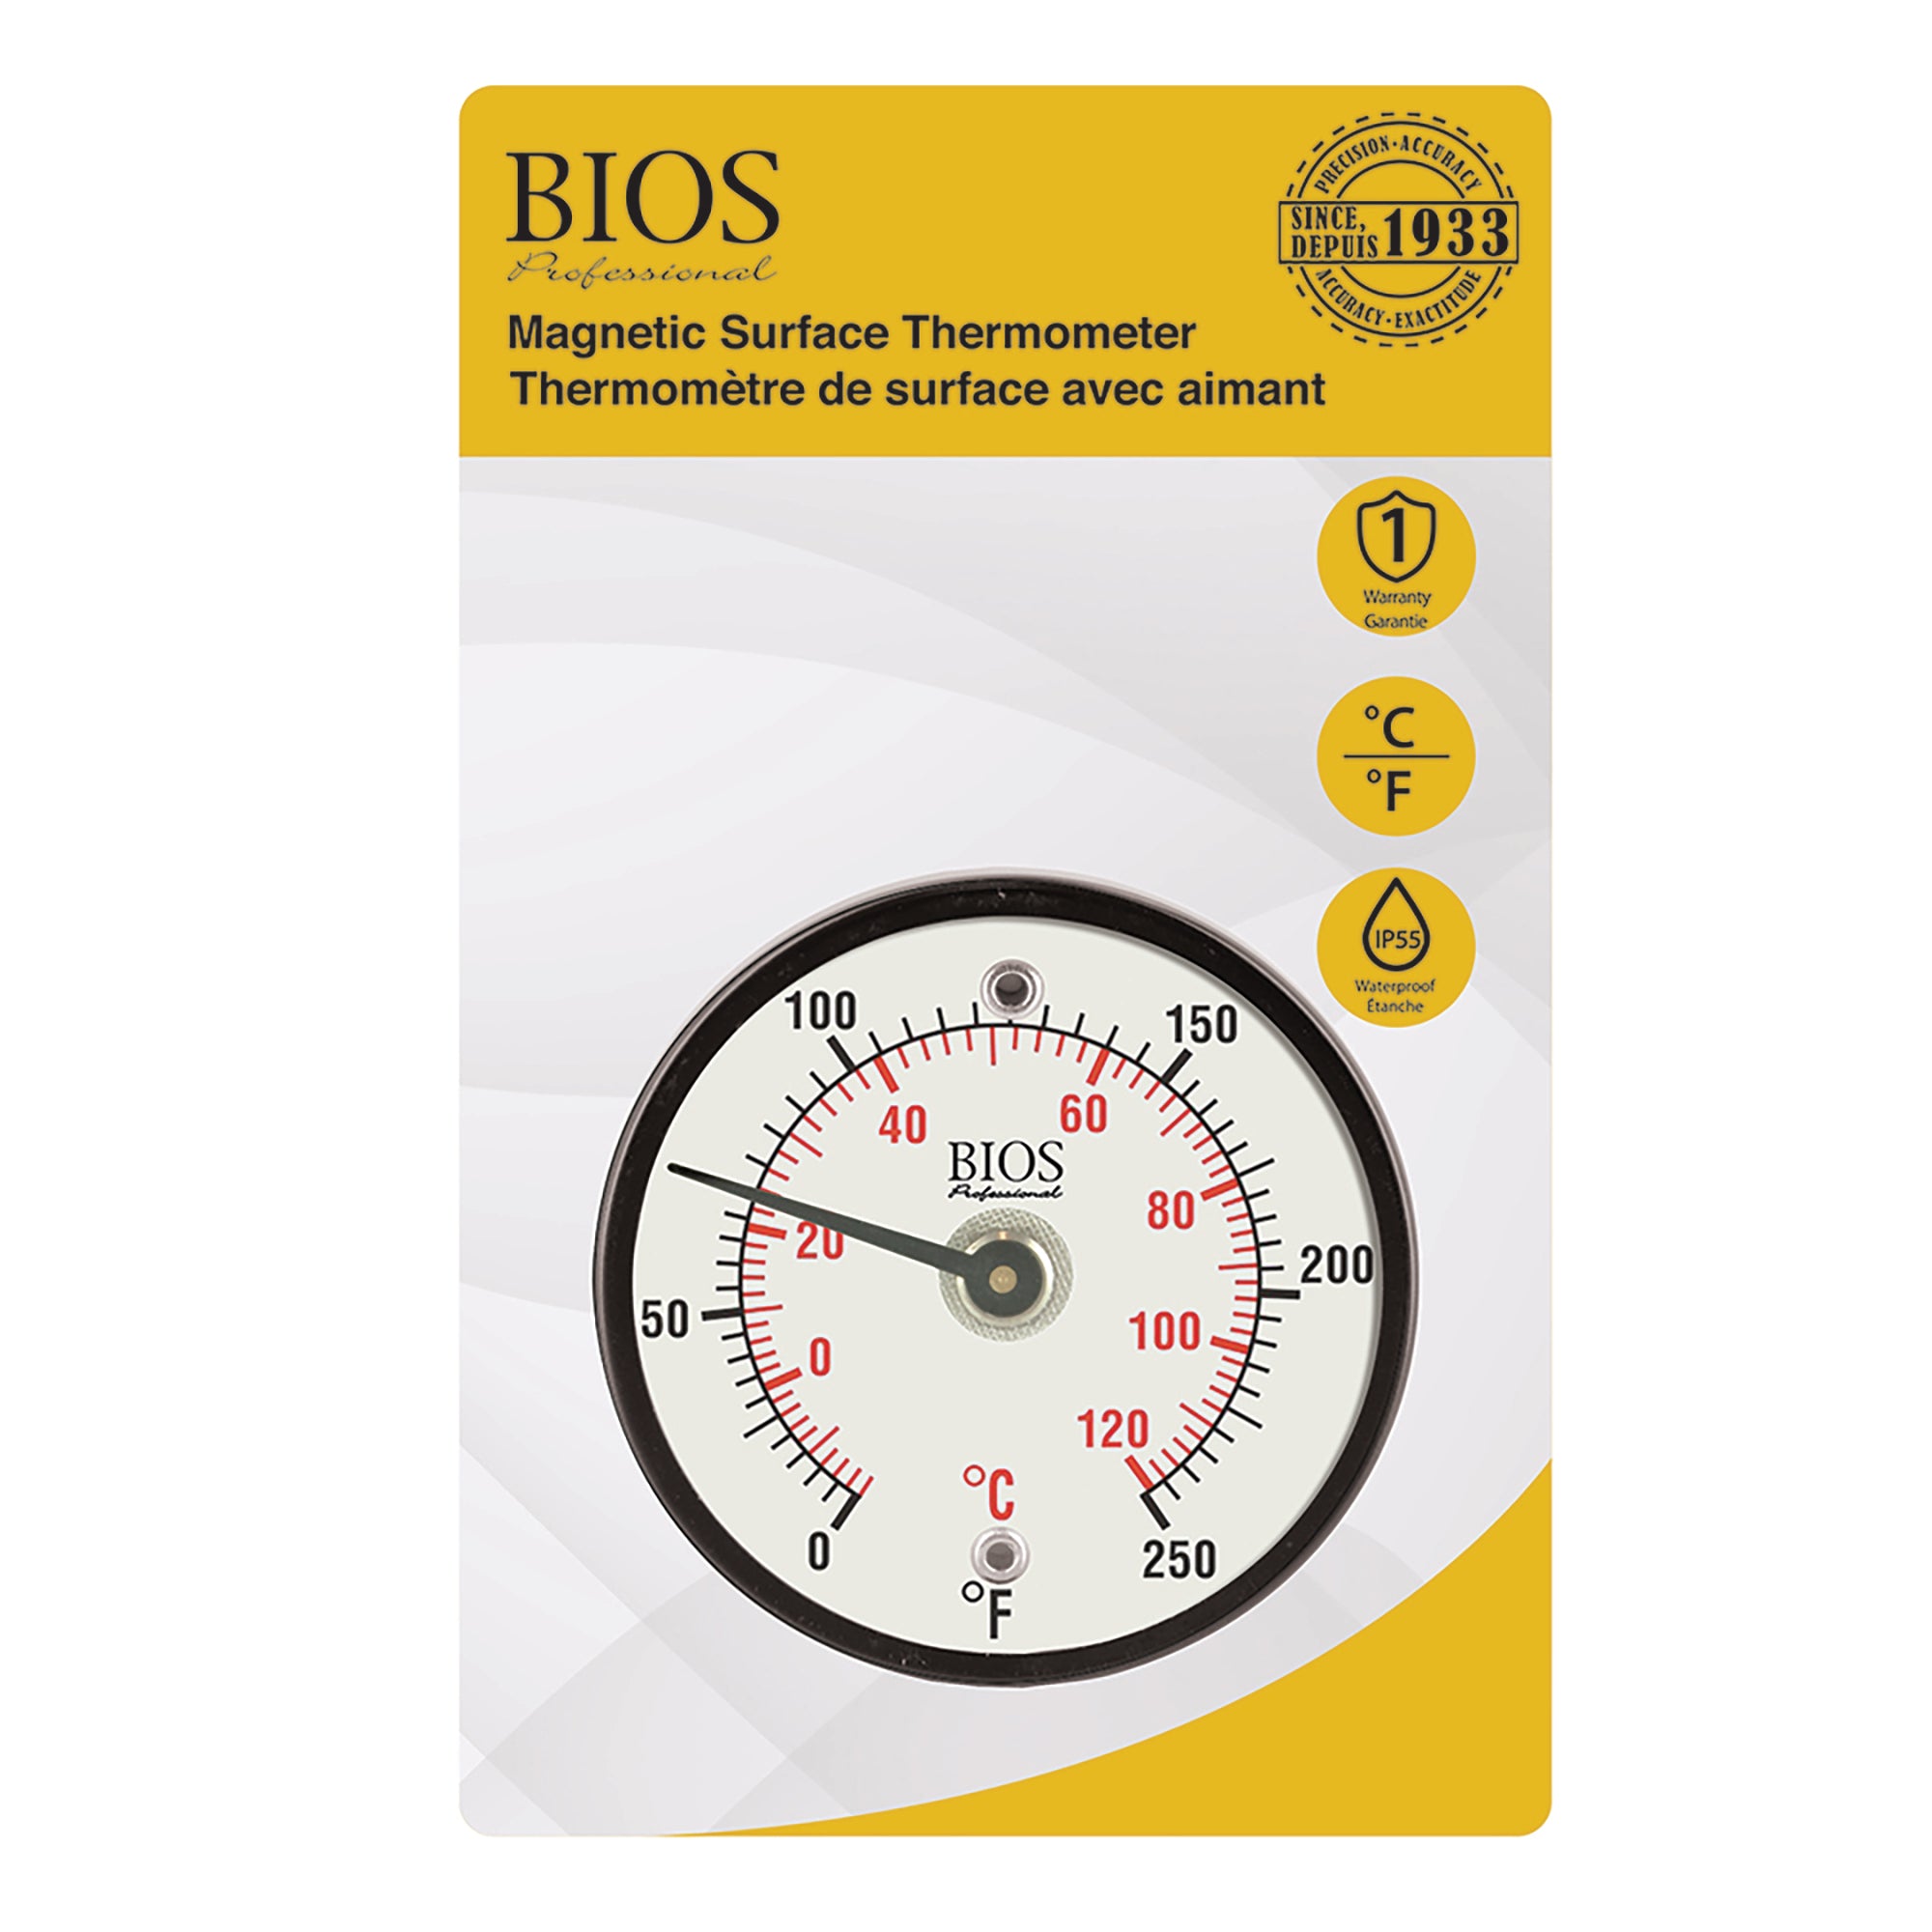 Charles Keasing Blive gift Intermediate Magnetic Surface Thermometer – BIOS Medical